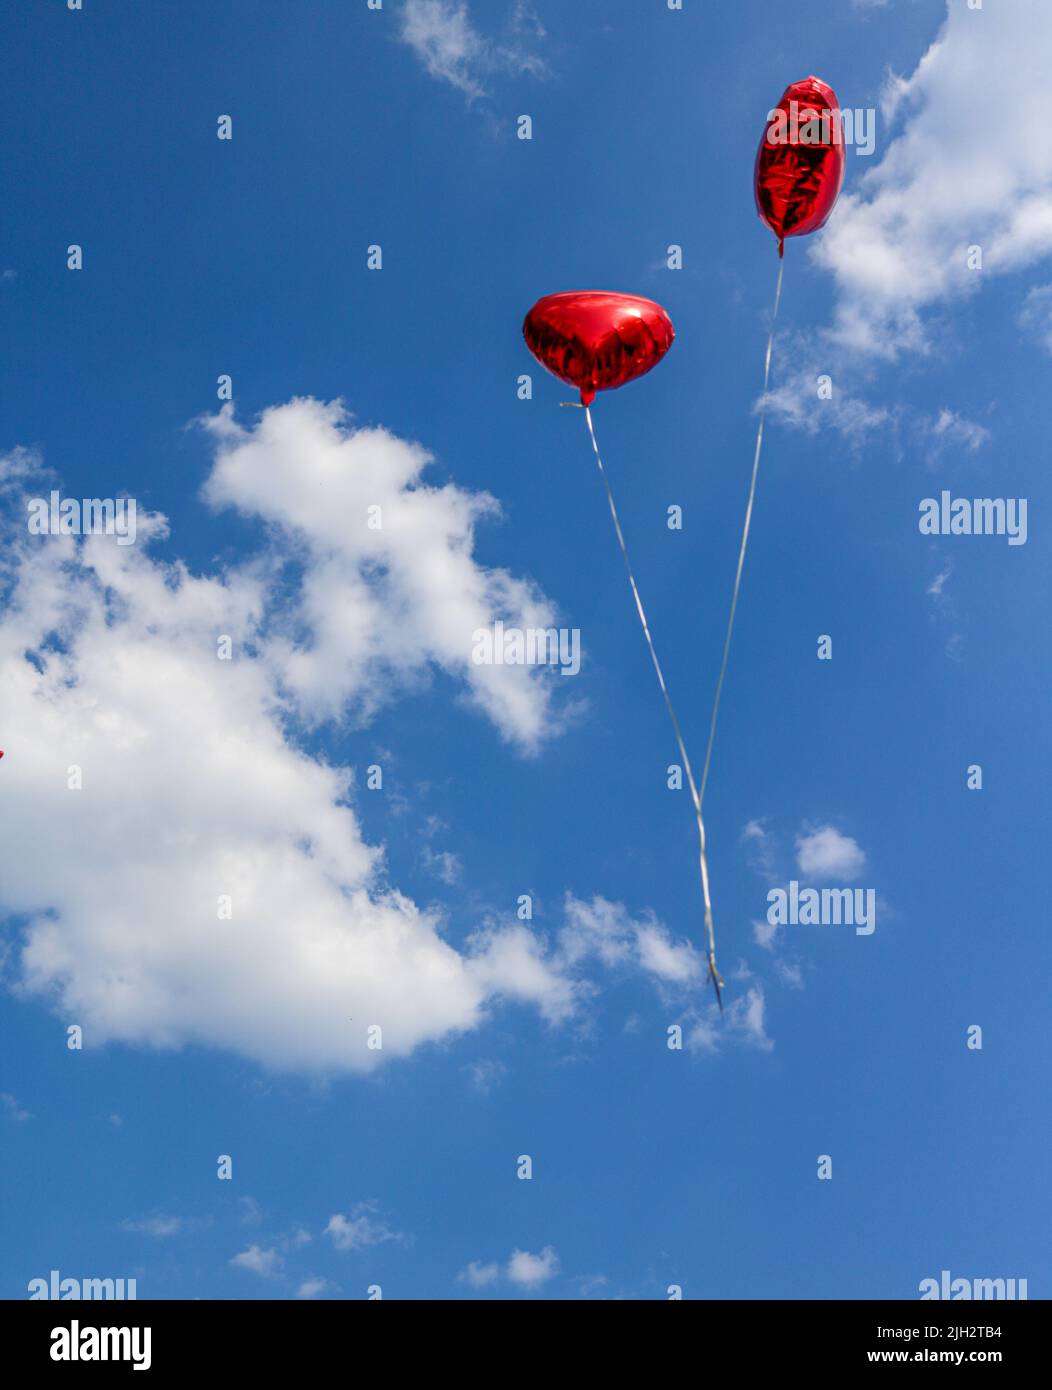 two red balloons in heart shape in front of a blue summer sky with white fair weather clouds Stock Photo